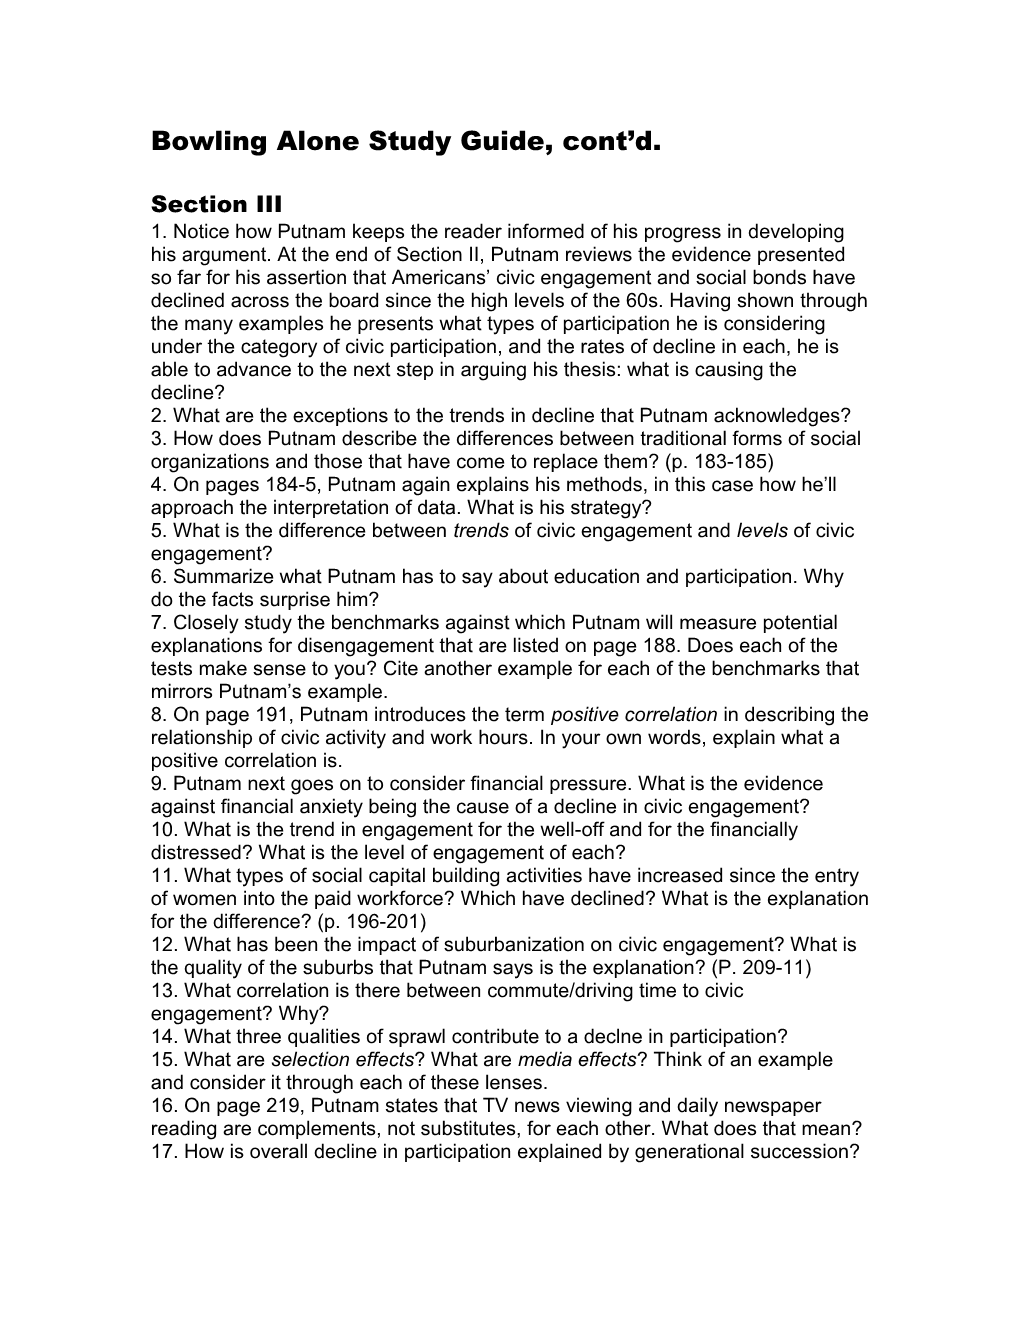 Bowling Alone Study Guide, Cont D